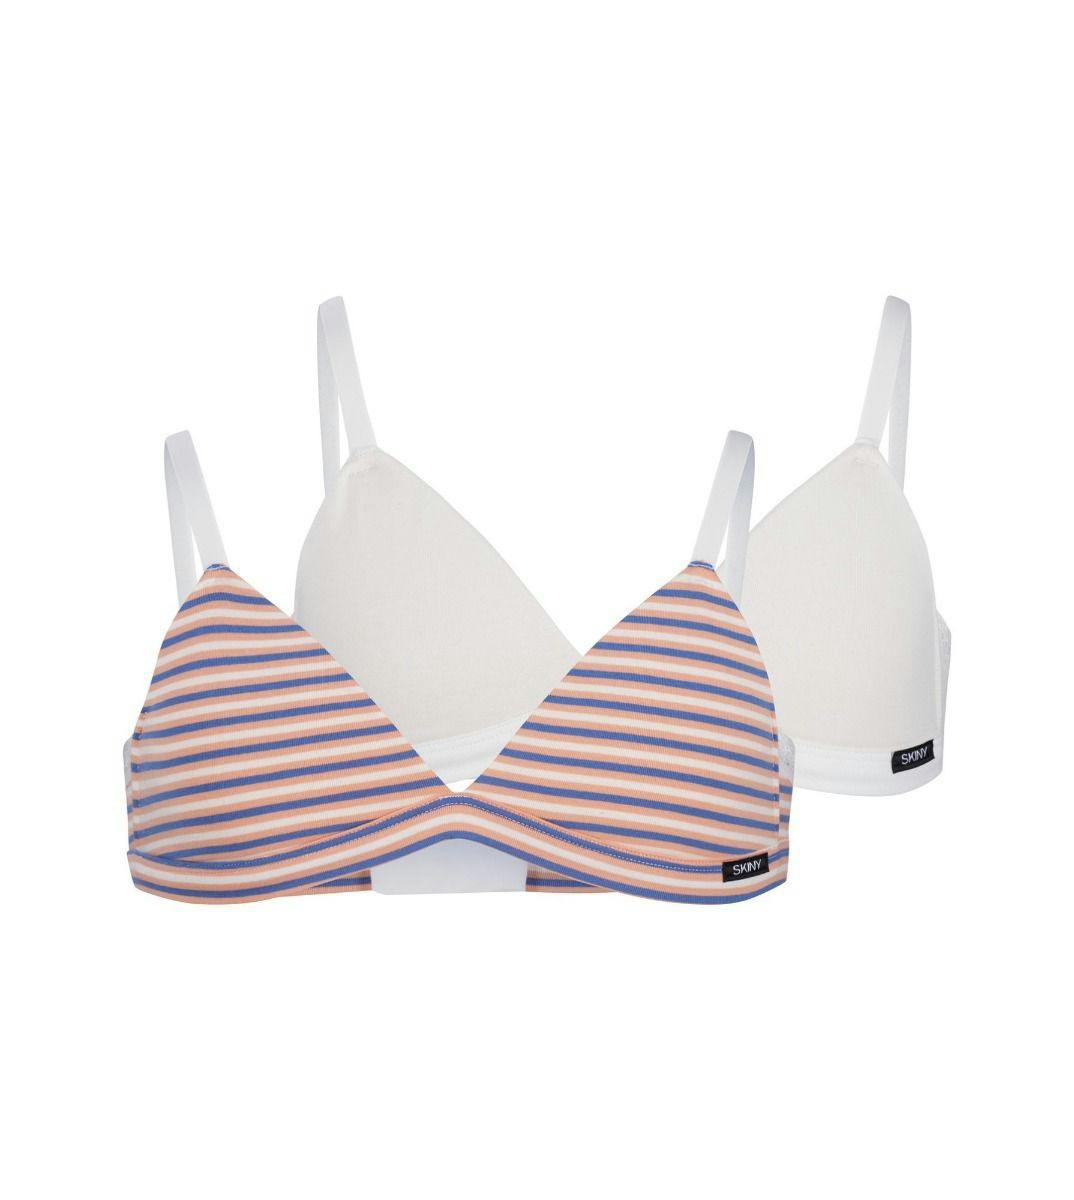 Reusachtig Sporten koppeling Skiny BH topje 2 pack Padded Triangle Every Day In Cotton M 030004-08S253